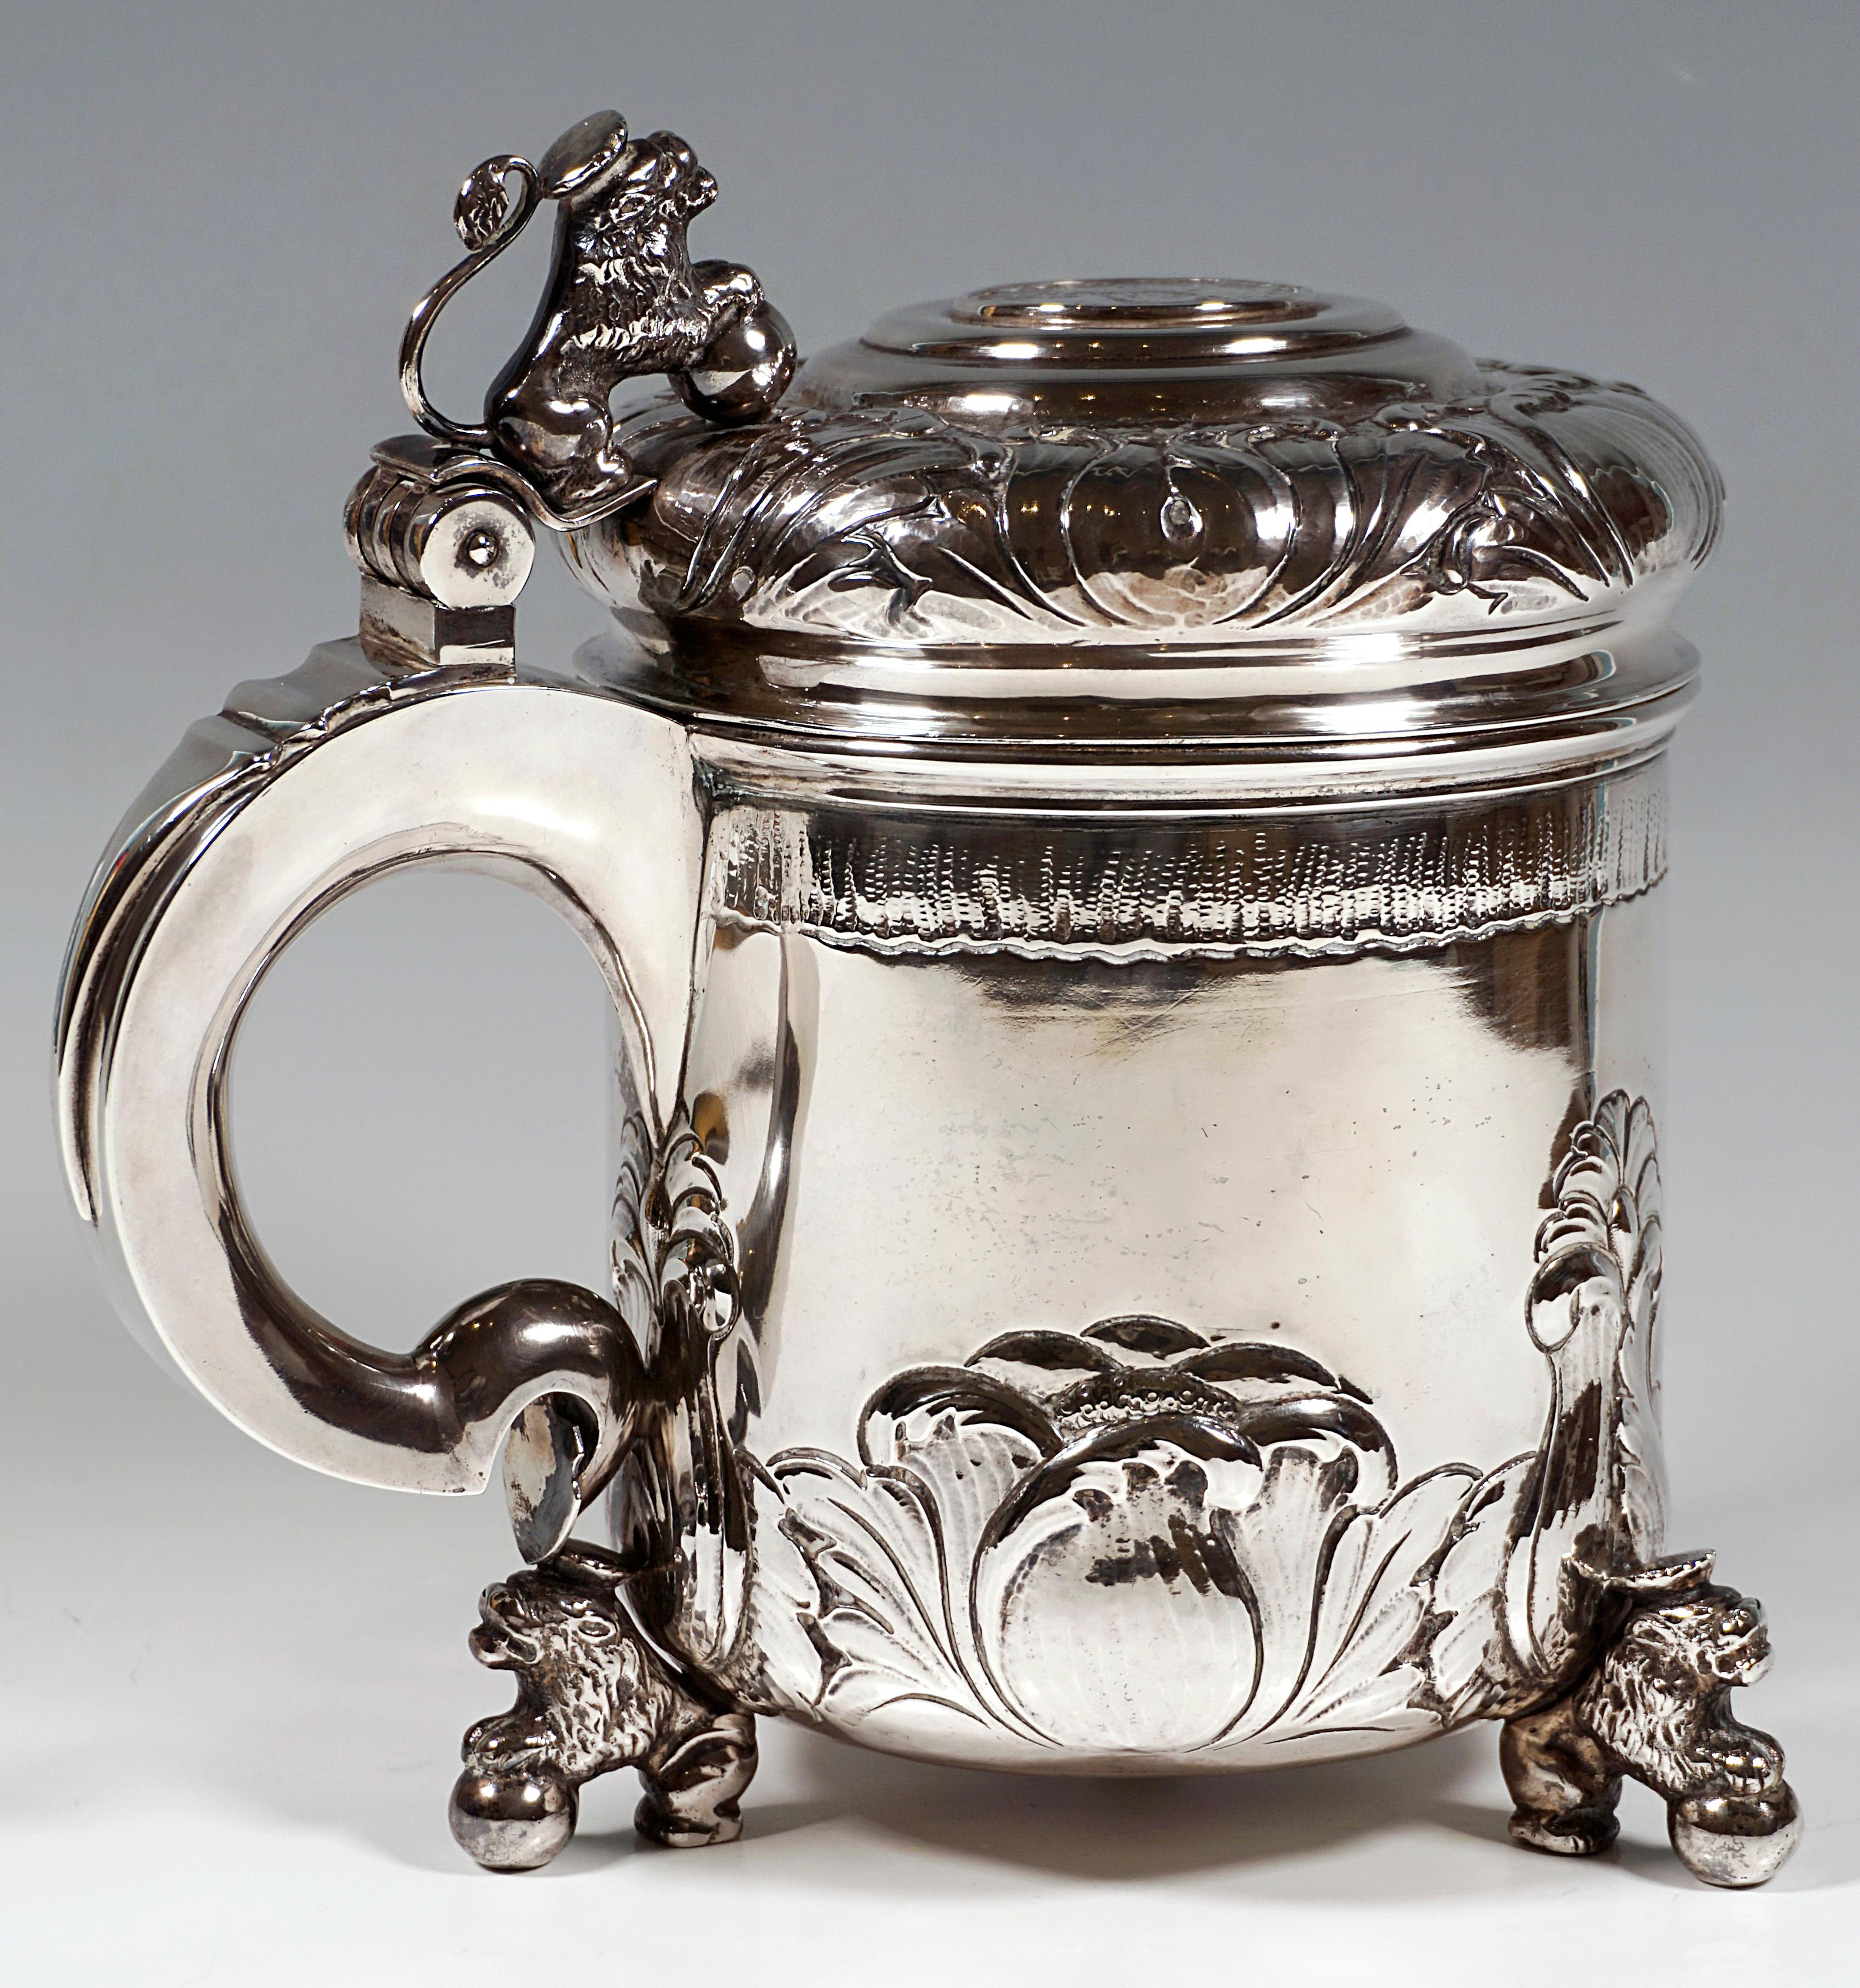 A large silver tankard of basic cylindrical form, standing on three feet in the shape of seated crowned lions with their forelegs resting on spheres, floral relief decoration to the lower part of the vessel and to the domed loaf-shaped lid, which is